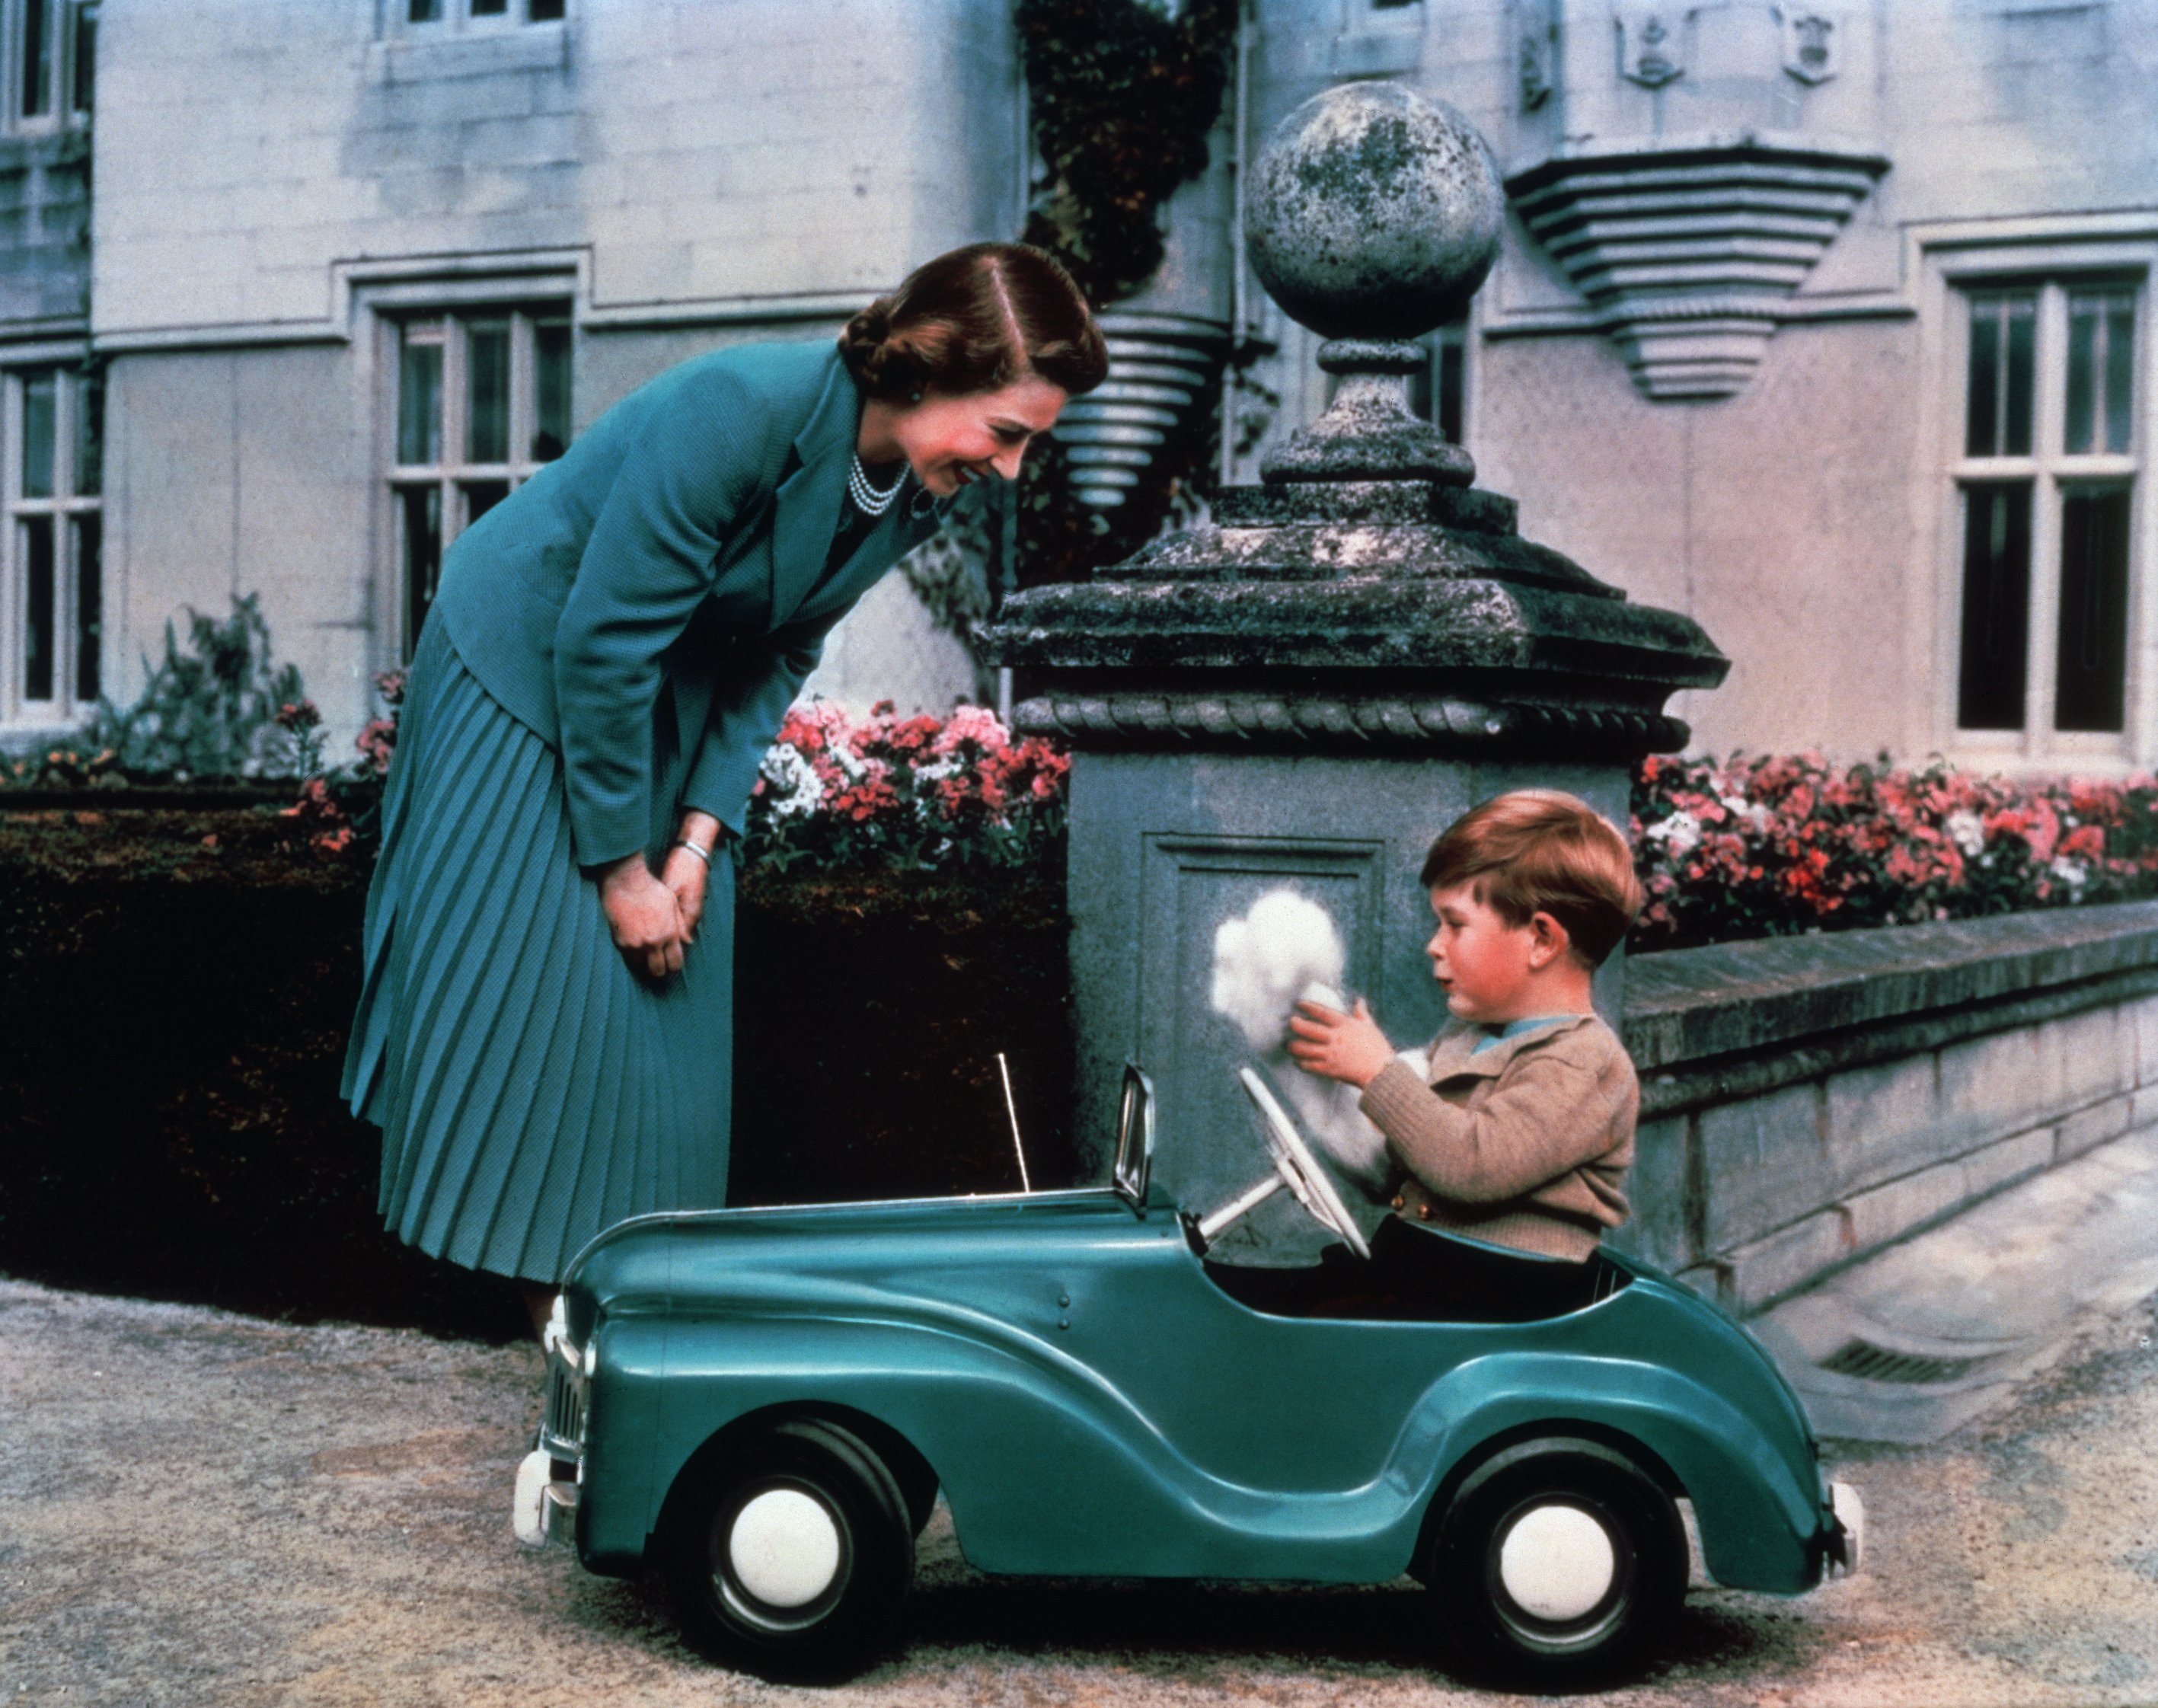 Queen Elizabeth watches her son Prince Charles driving in a toy car on the grounds of Balmoral Castle, circa 1952 | Source: Getty Images